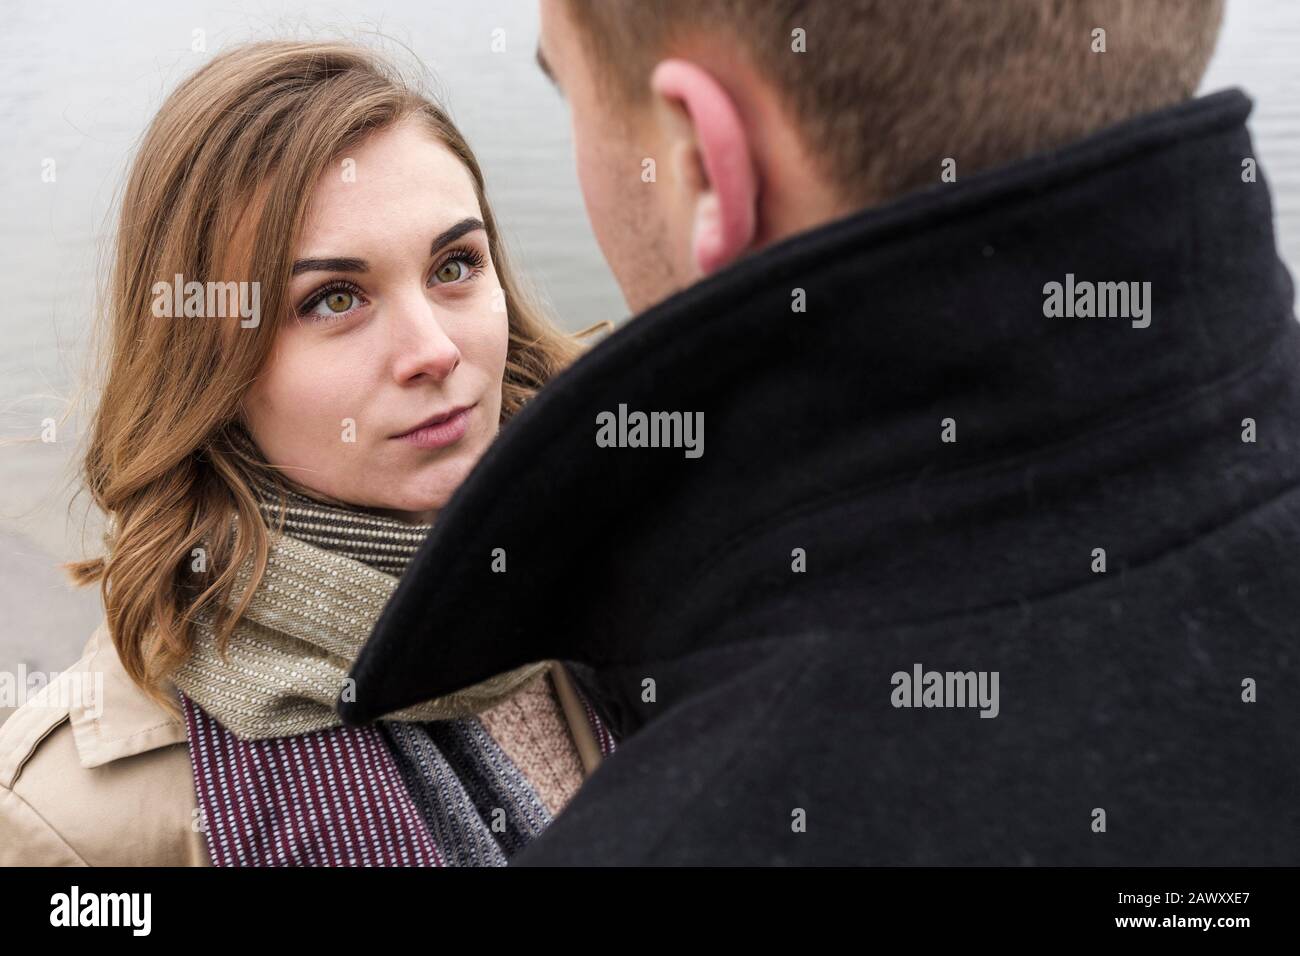 Loving young woman looking at her boyfriend Stock Photo